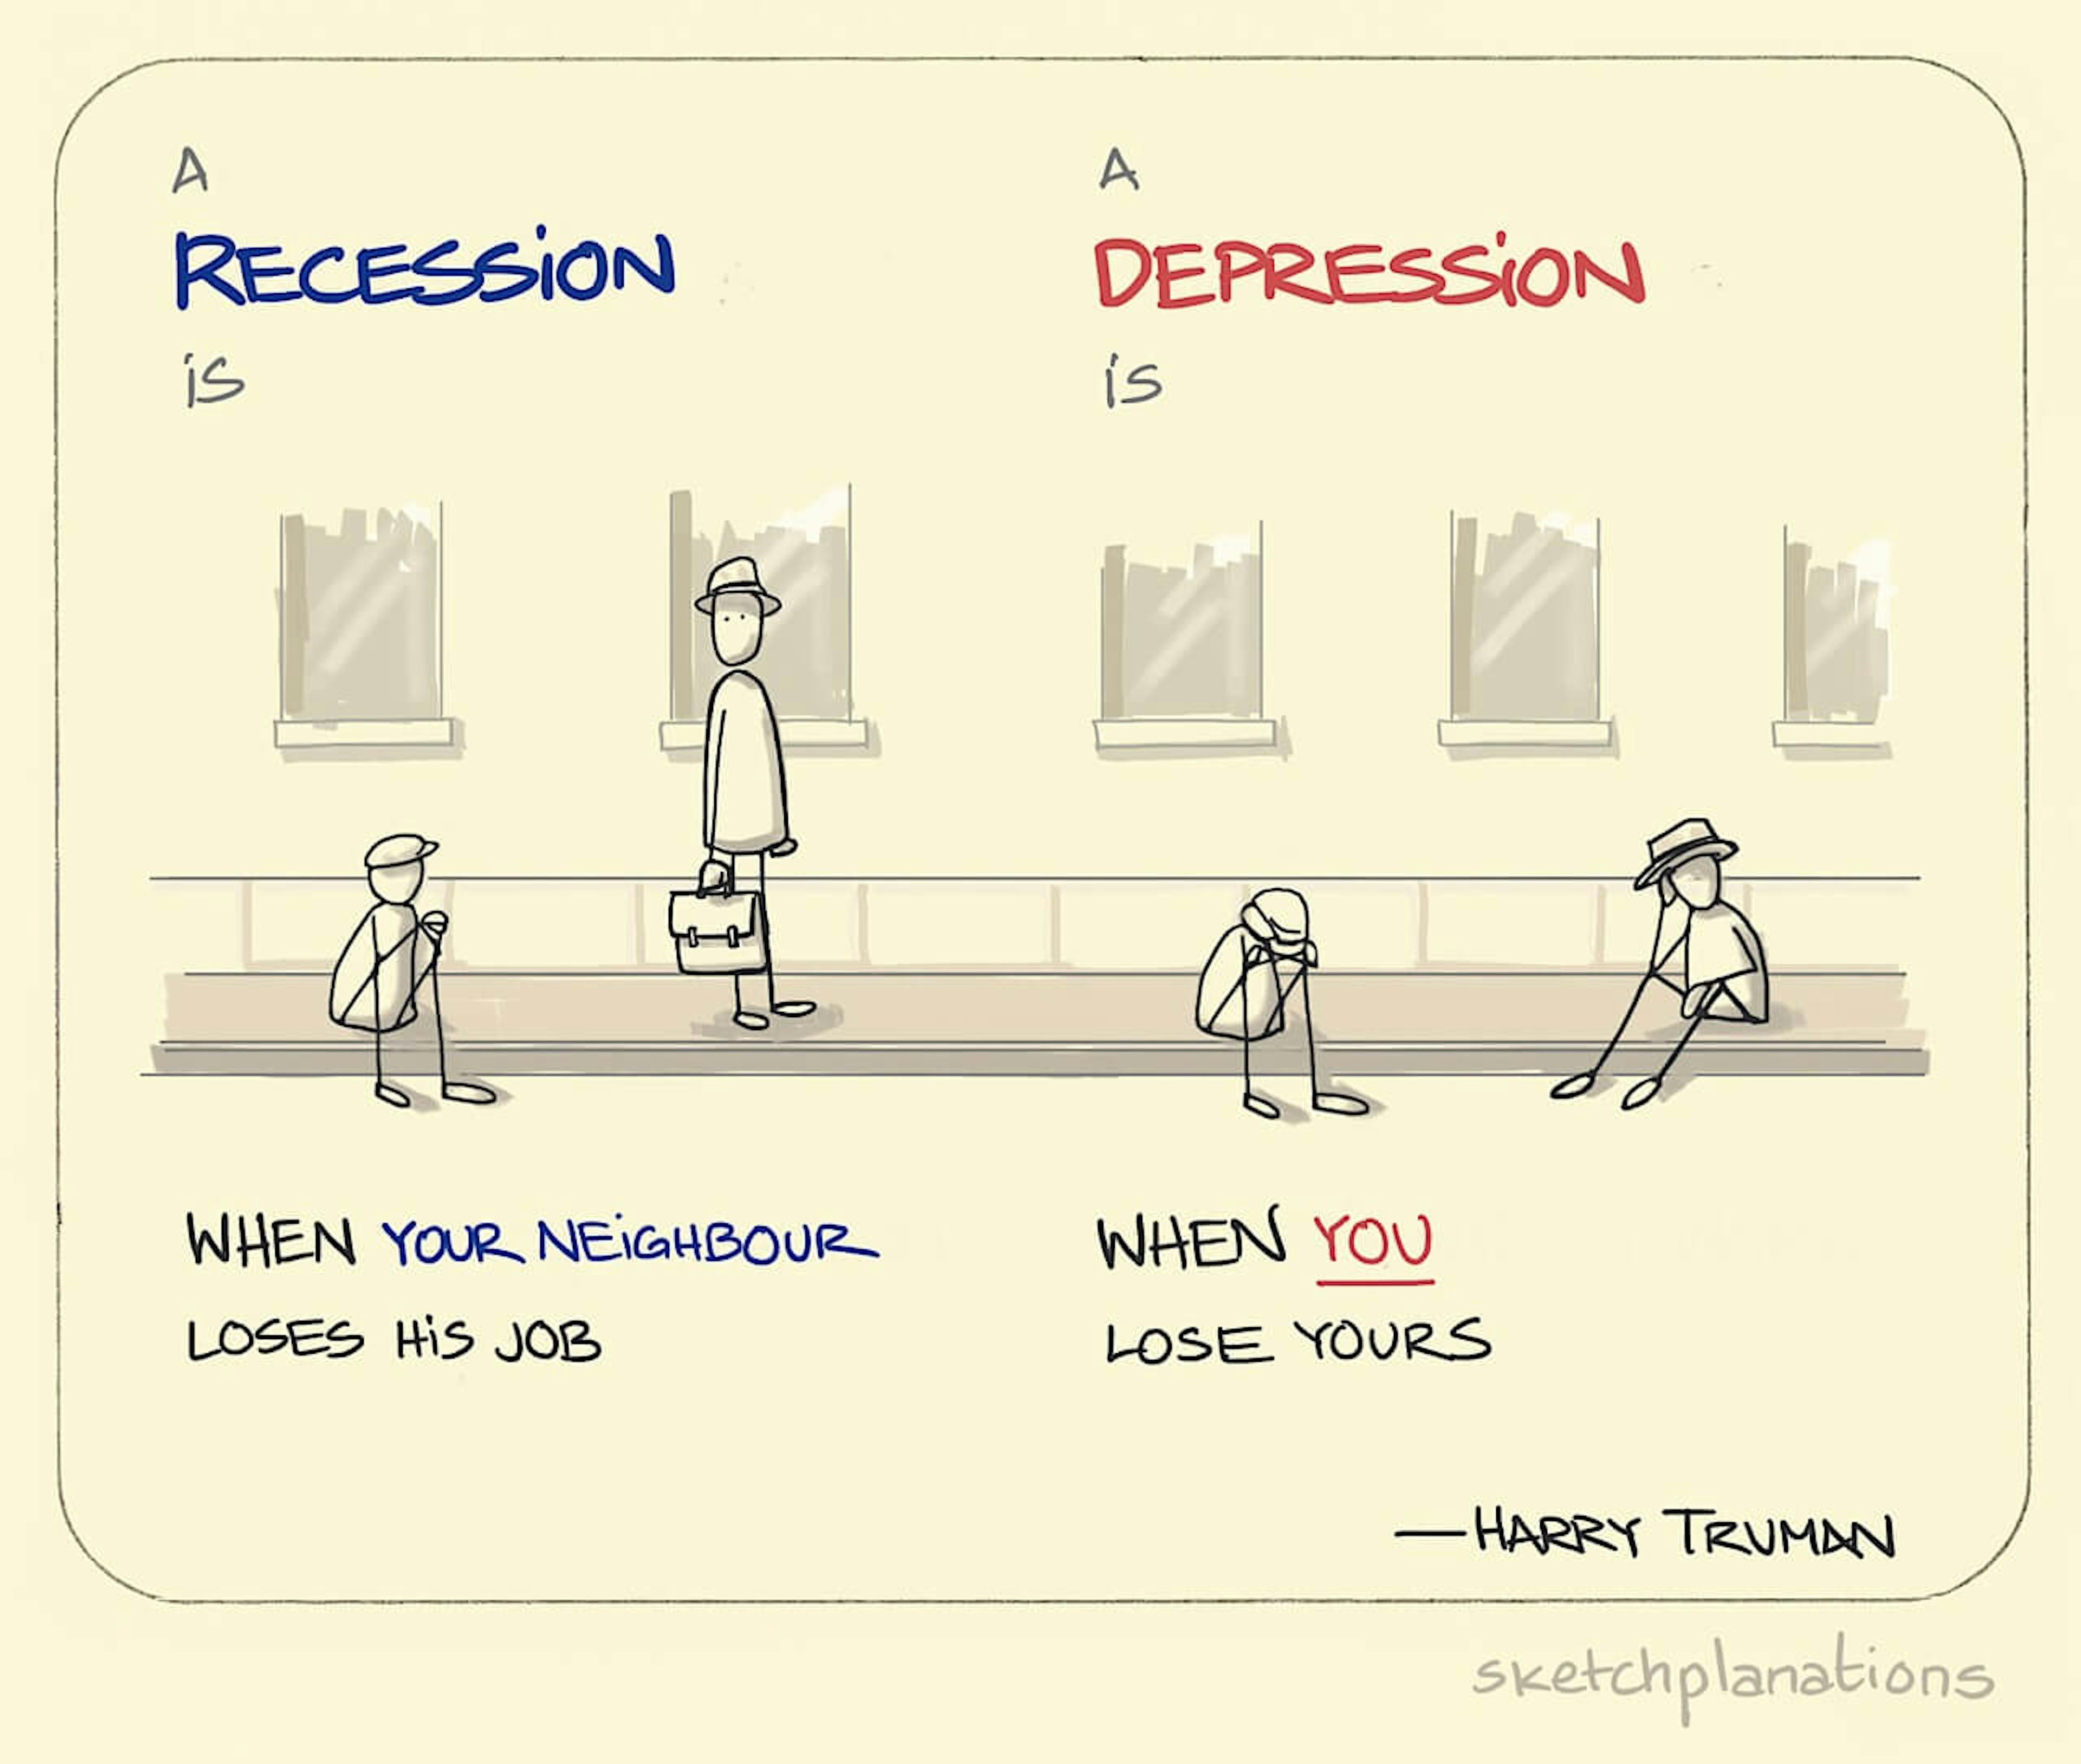 Recession vs Depression illustration: Recession is depicted by a man in a flat cap sitting on the edge of the pavement next to a man with a briefcase on his way to work. Depression is depicted by both men now sat on the pavement in despair. 